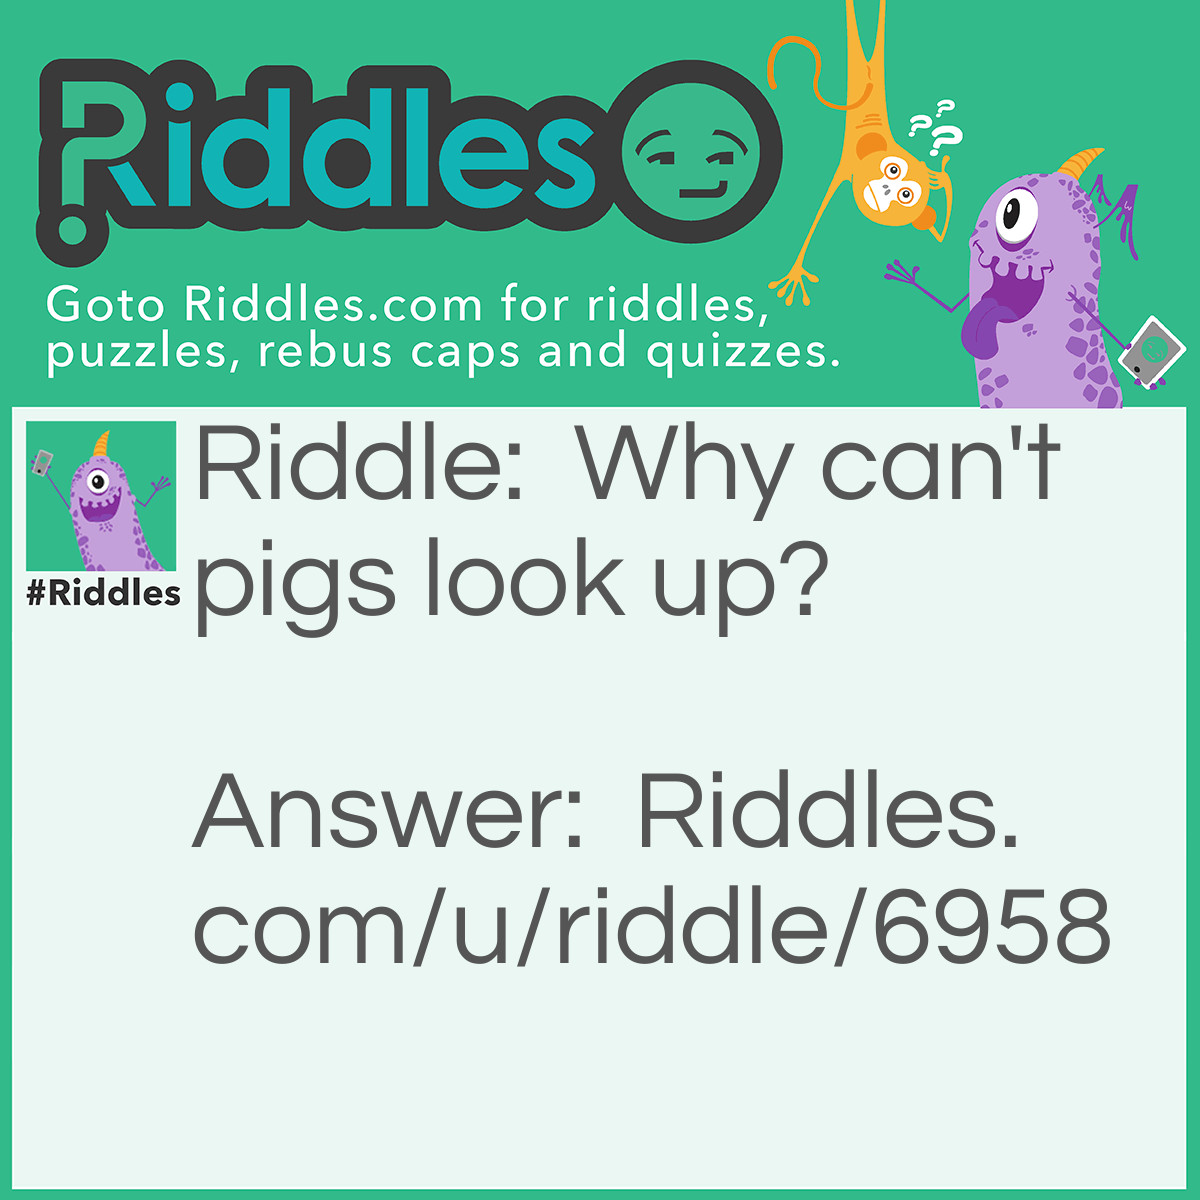 Riddle: Why can't pigs look up? Answer: They don't need to. Truffles are in the floor!